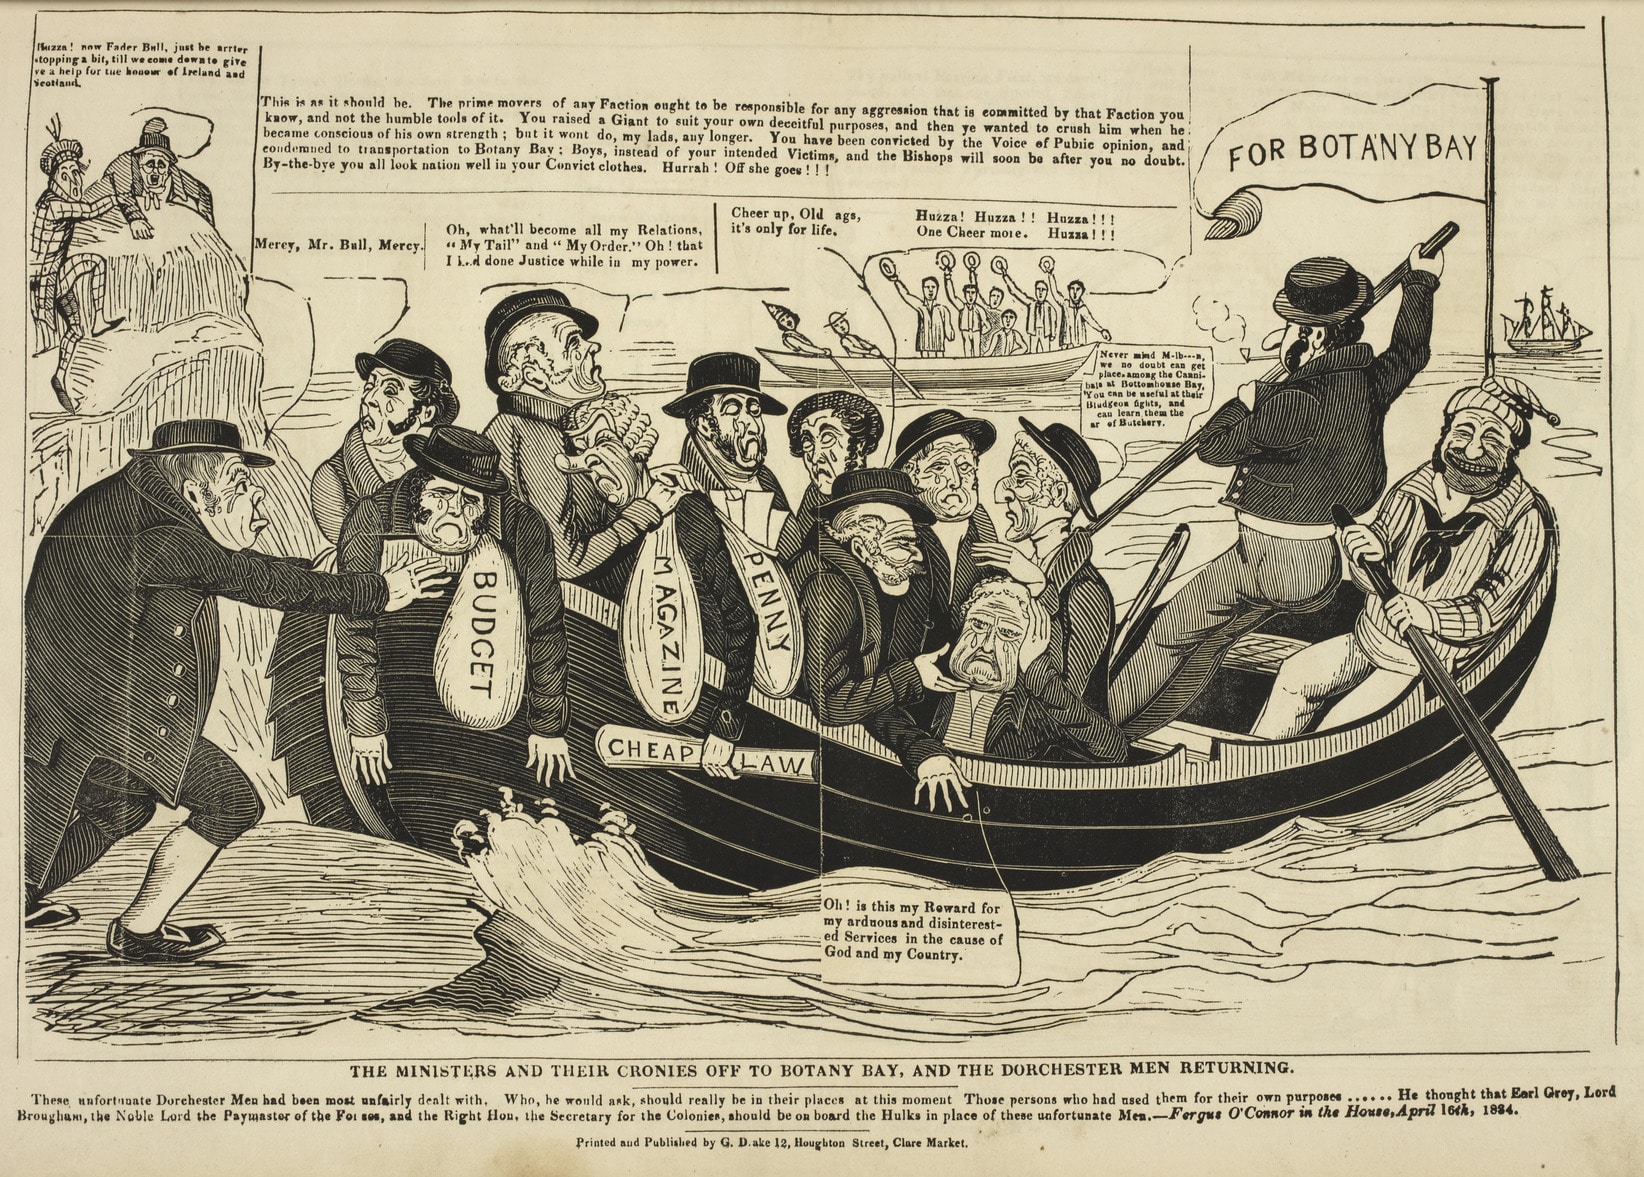 'The Ministers and their cronies off to Botany Bay, and the Dorcester men returning'. Politicians in tears on a boat, going away from the shore; free Dorchester Unionists on another boat, getting closer to the shore. At the bow is a flag reading 'FOR BOTANY BAY'. The two oarsmen guide the boat towards a ship from which is returning another boat, containing two oarsmen and the six Tolpuddle Martyrs. Among the politicians are Lord Chancellor Brougham, with two money-bags marked 'PENNY' and 'MAGAZINE', and holding a rolled-up paper reading 'CHEAP LAW'. Brougham is being comforted by Lord Melbourne. The Chancellor of the Exchequer Viscount Althorp, has a sack bearing the word 'BUDGET'. The Duke of Wellington declaims 'Never mind M-lb-n, we no doubt can get places among the Cannibals at Bottomhouse Bay. An Irishman and a Scotsman look on, while John Bull addresses the politicians. Image taken from The Political drama. [A series of caricatures.] Originally published/produced in [London] : Printed and published by G. Drake, 12, Houghton Street, Clare Market, [1834-1835]. Image taken from The Political drama. [A series of caricatures.] Held and digitised by the British Library (CC0 1.0) See more below, March 18, 1834.